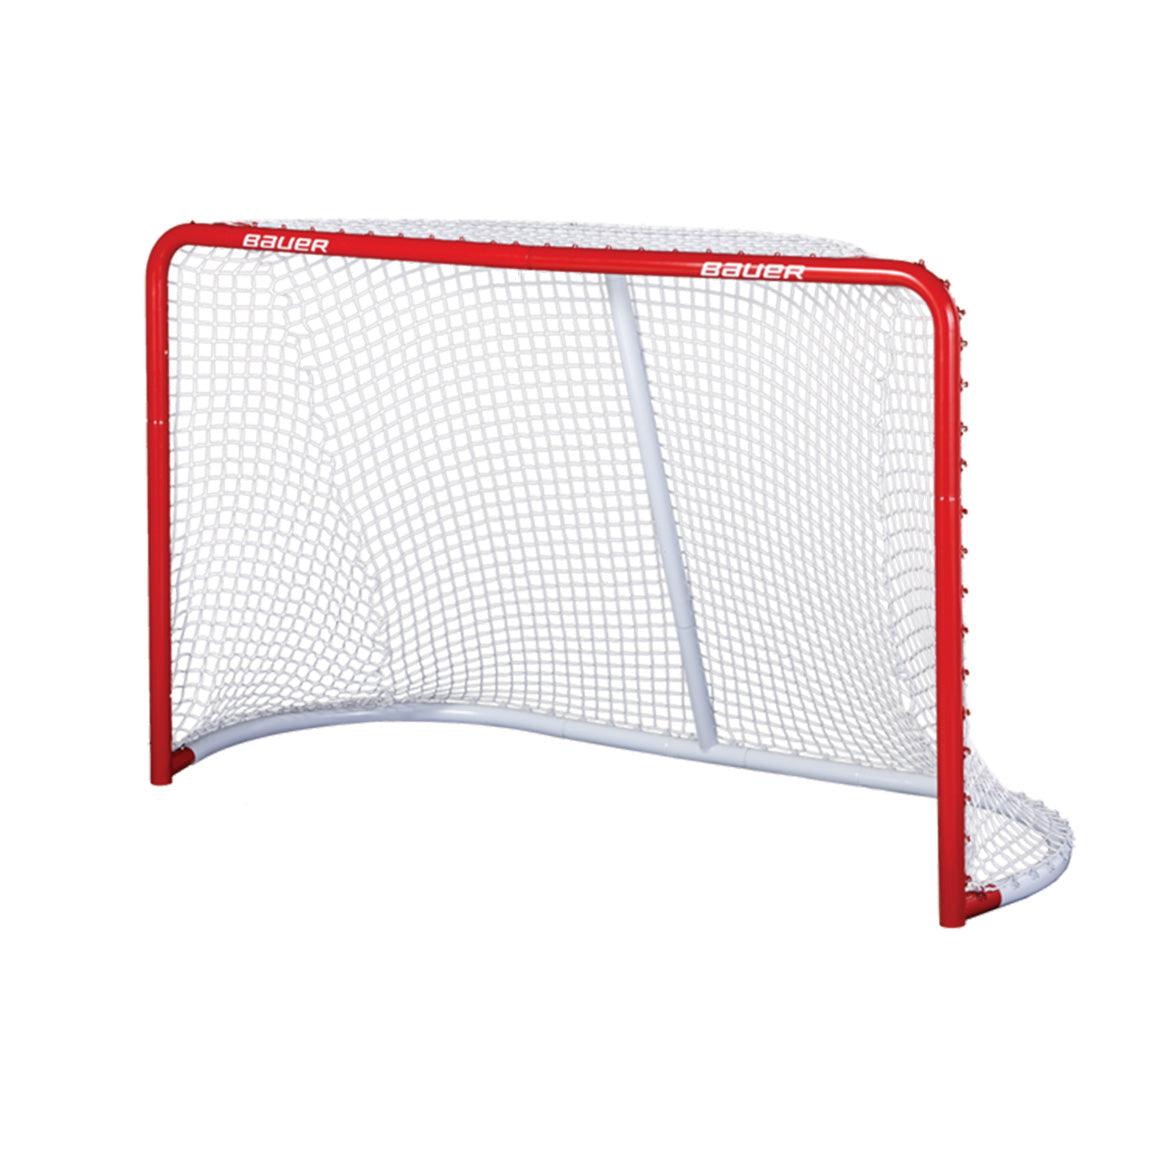 Pro Replacement Net - 6' X 4' - Sports Excellence